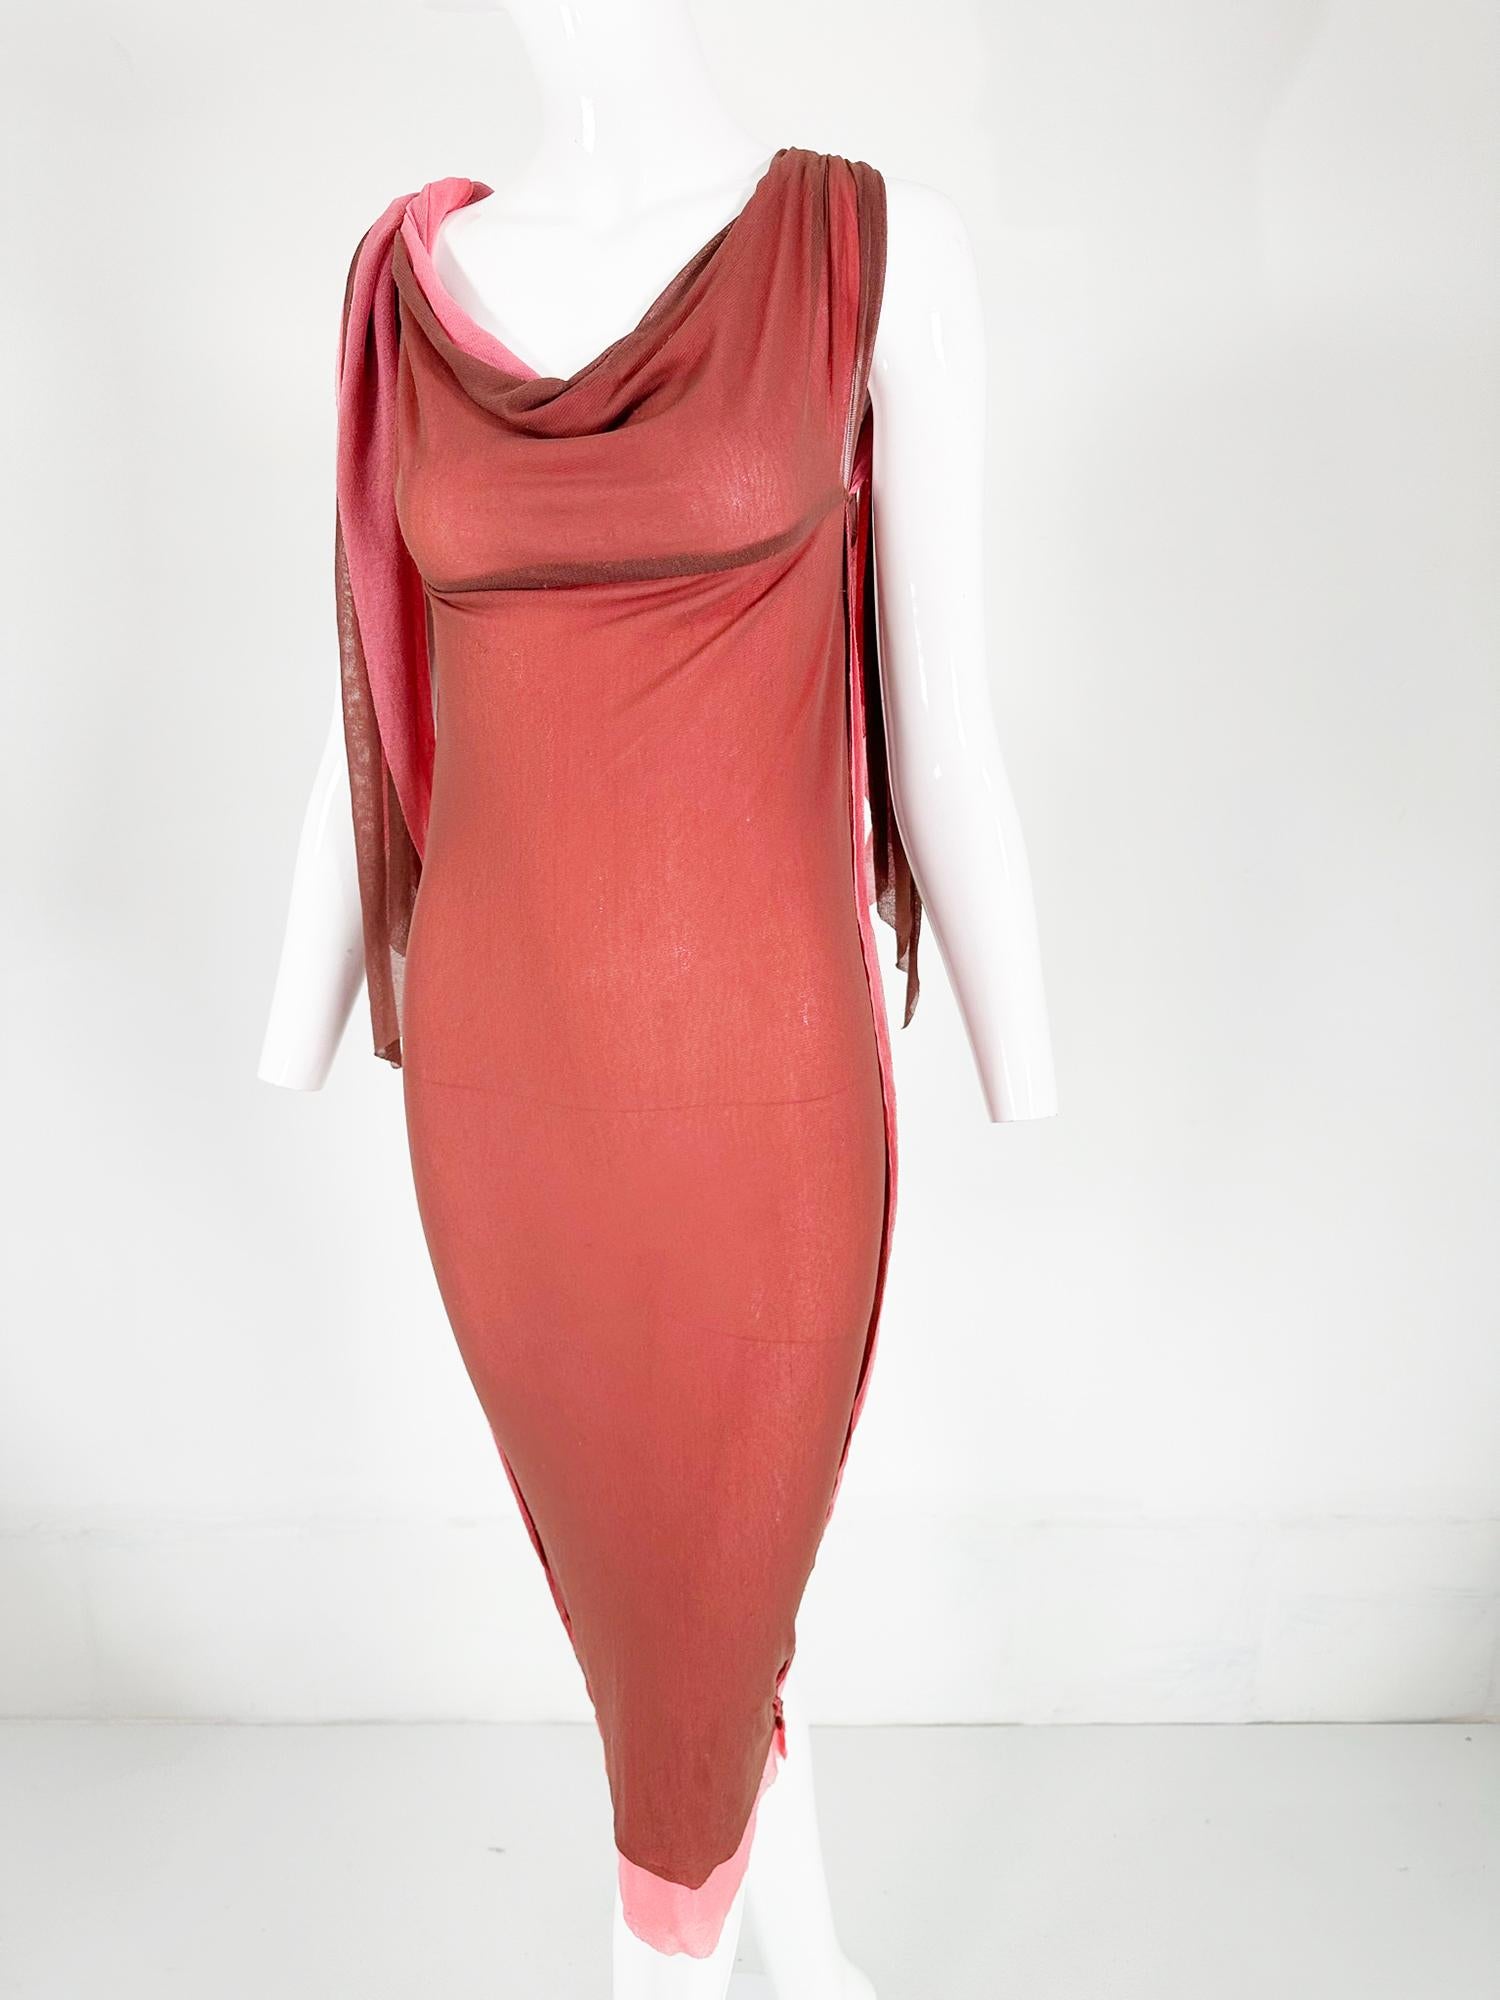 Jean Paul Gaultier Maille Coral & Brown Sheer Mesh Tie Tube Dress For Sale 8